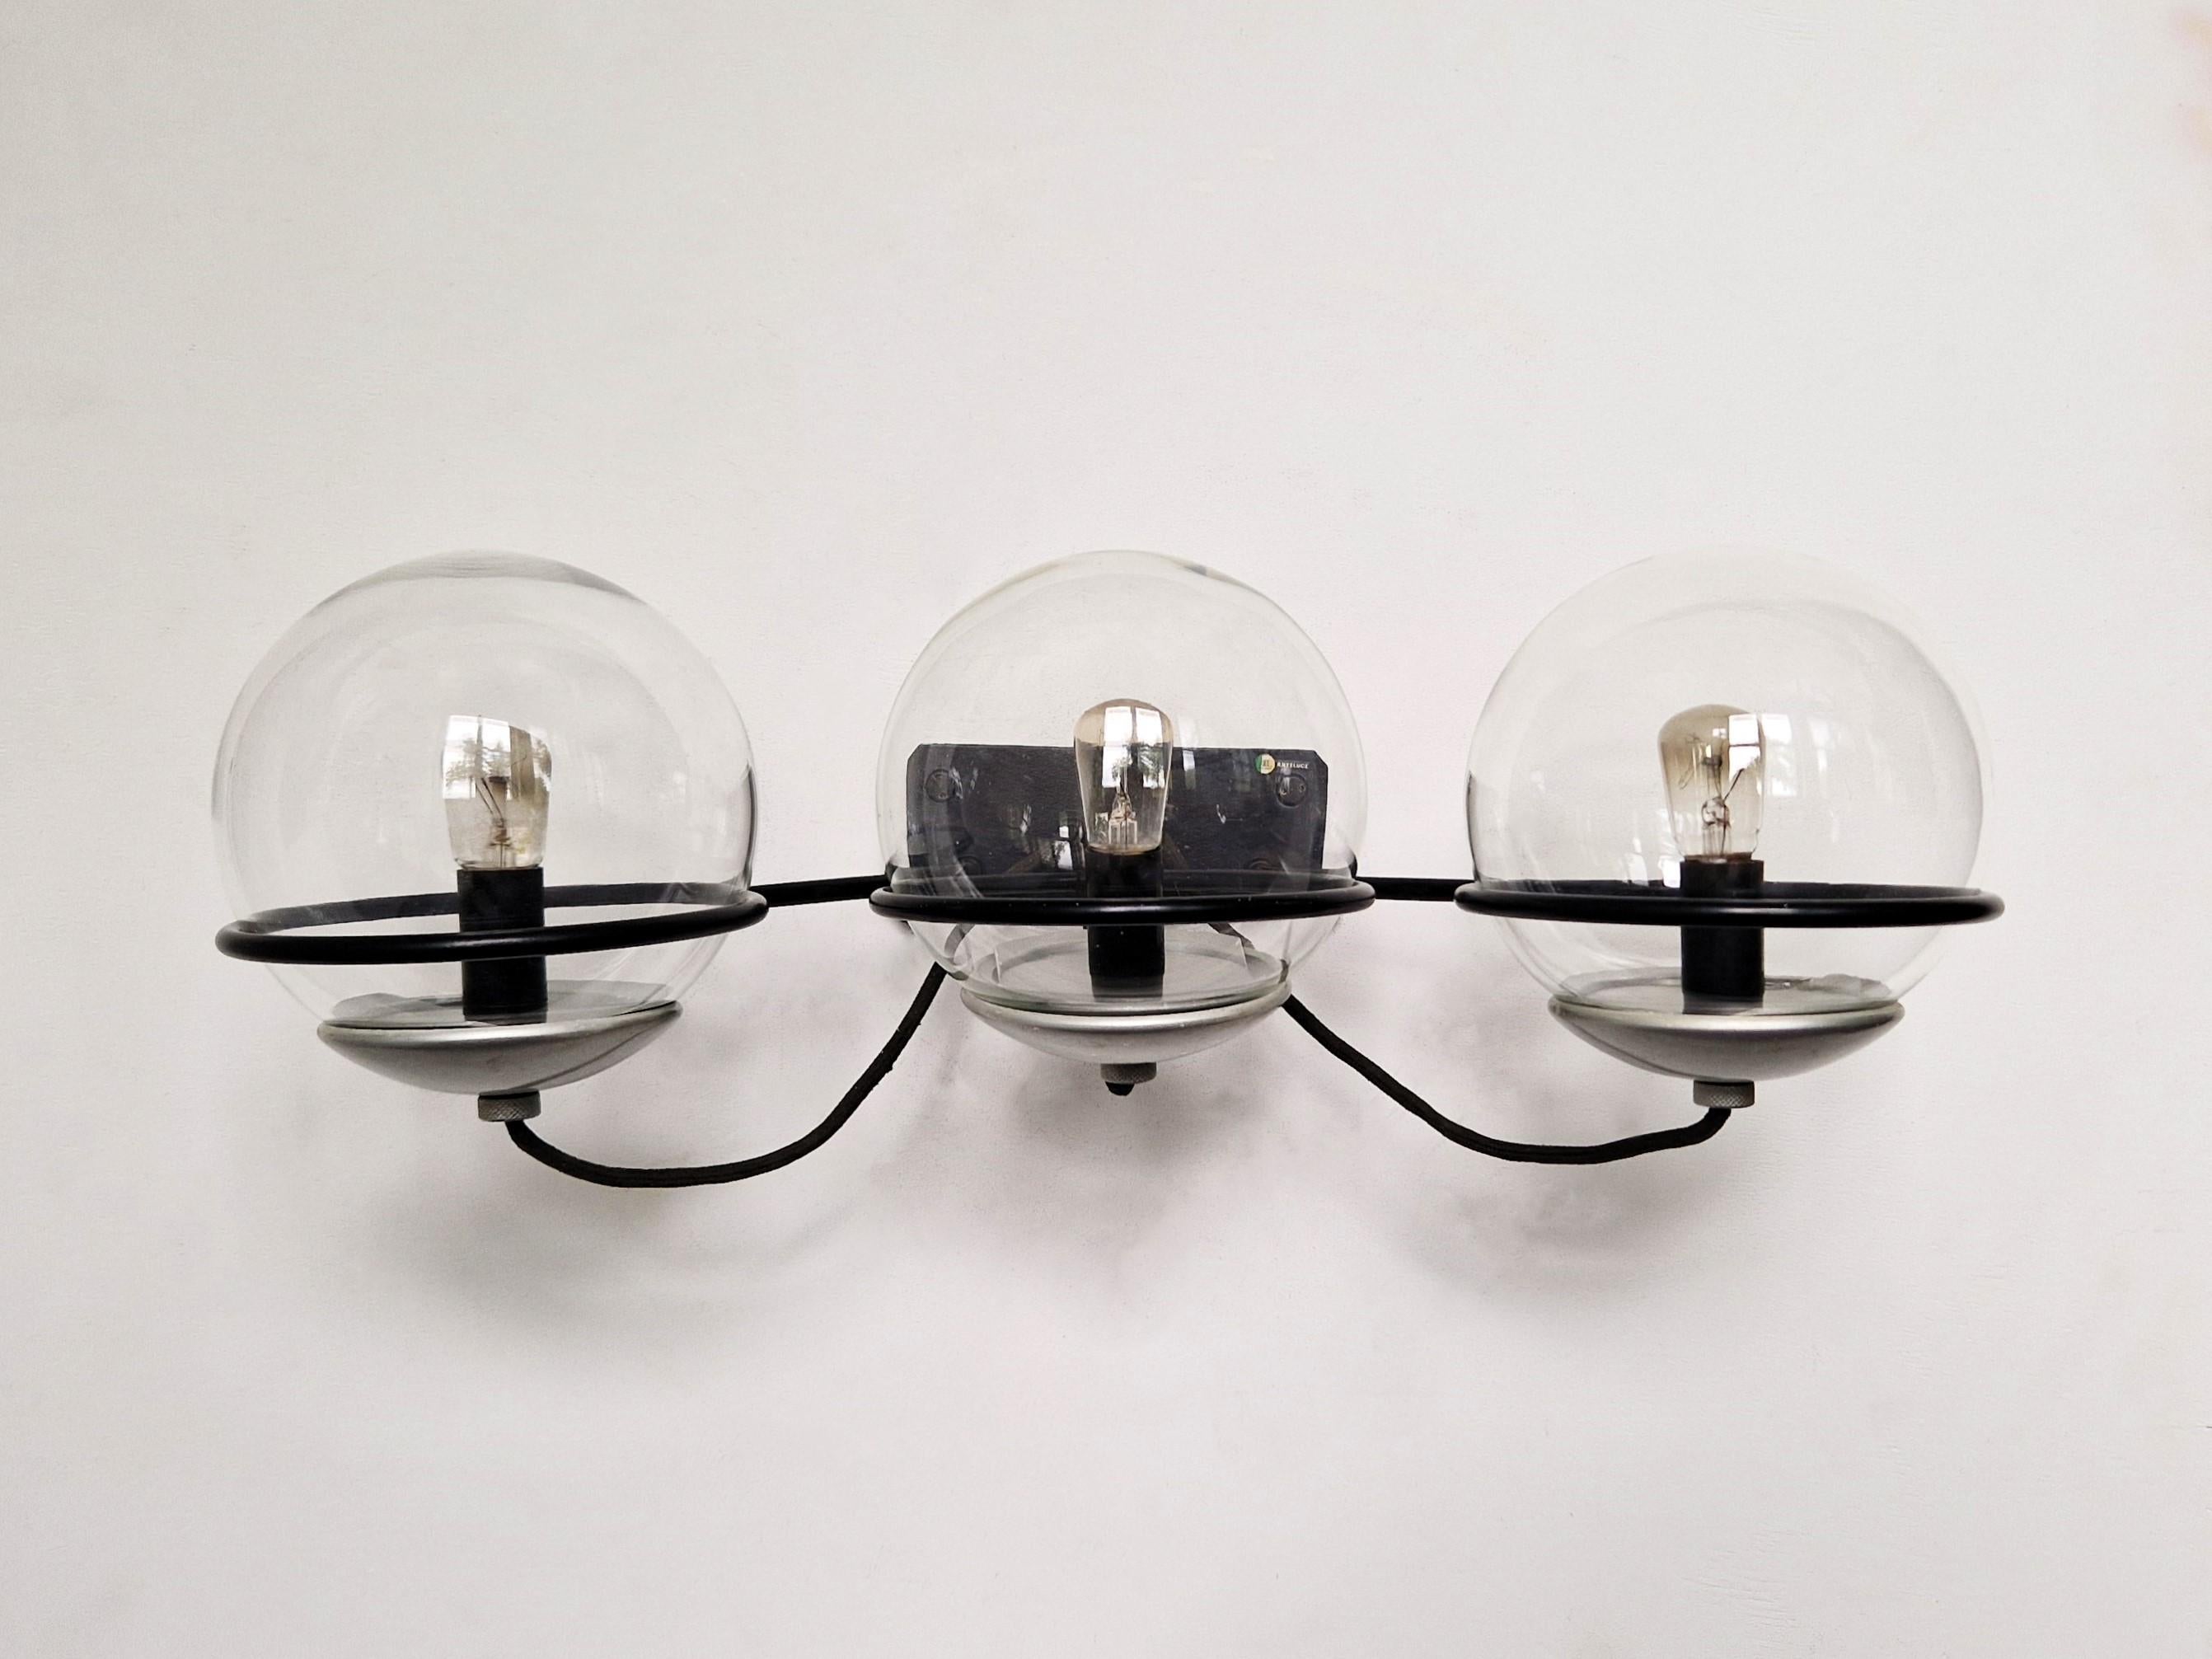 This amazing wall sconce was designed by Gino Sarfatti for Arteluce in the 1950's. It has an elegant black lacquered metal frame that holds 3 transparent glass globes. With the right bulbs a warm and gentle light can be spread. The diameter of each